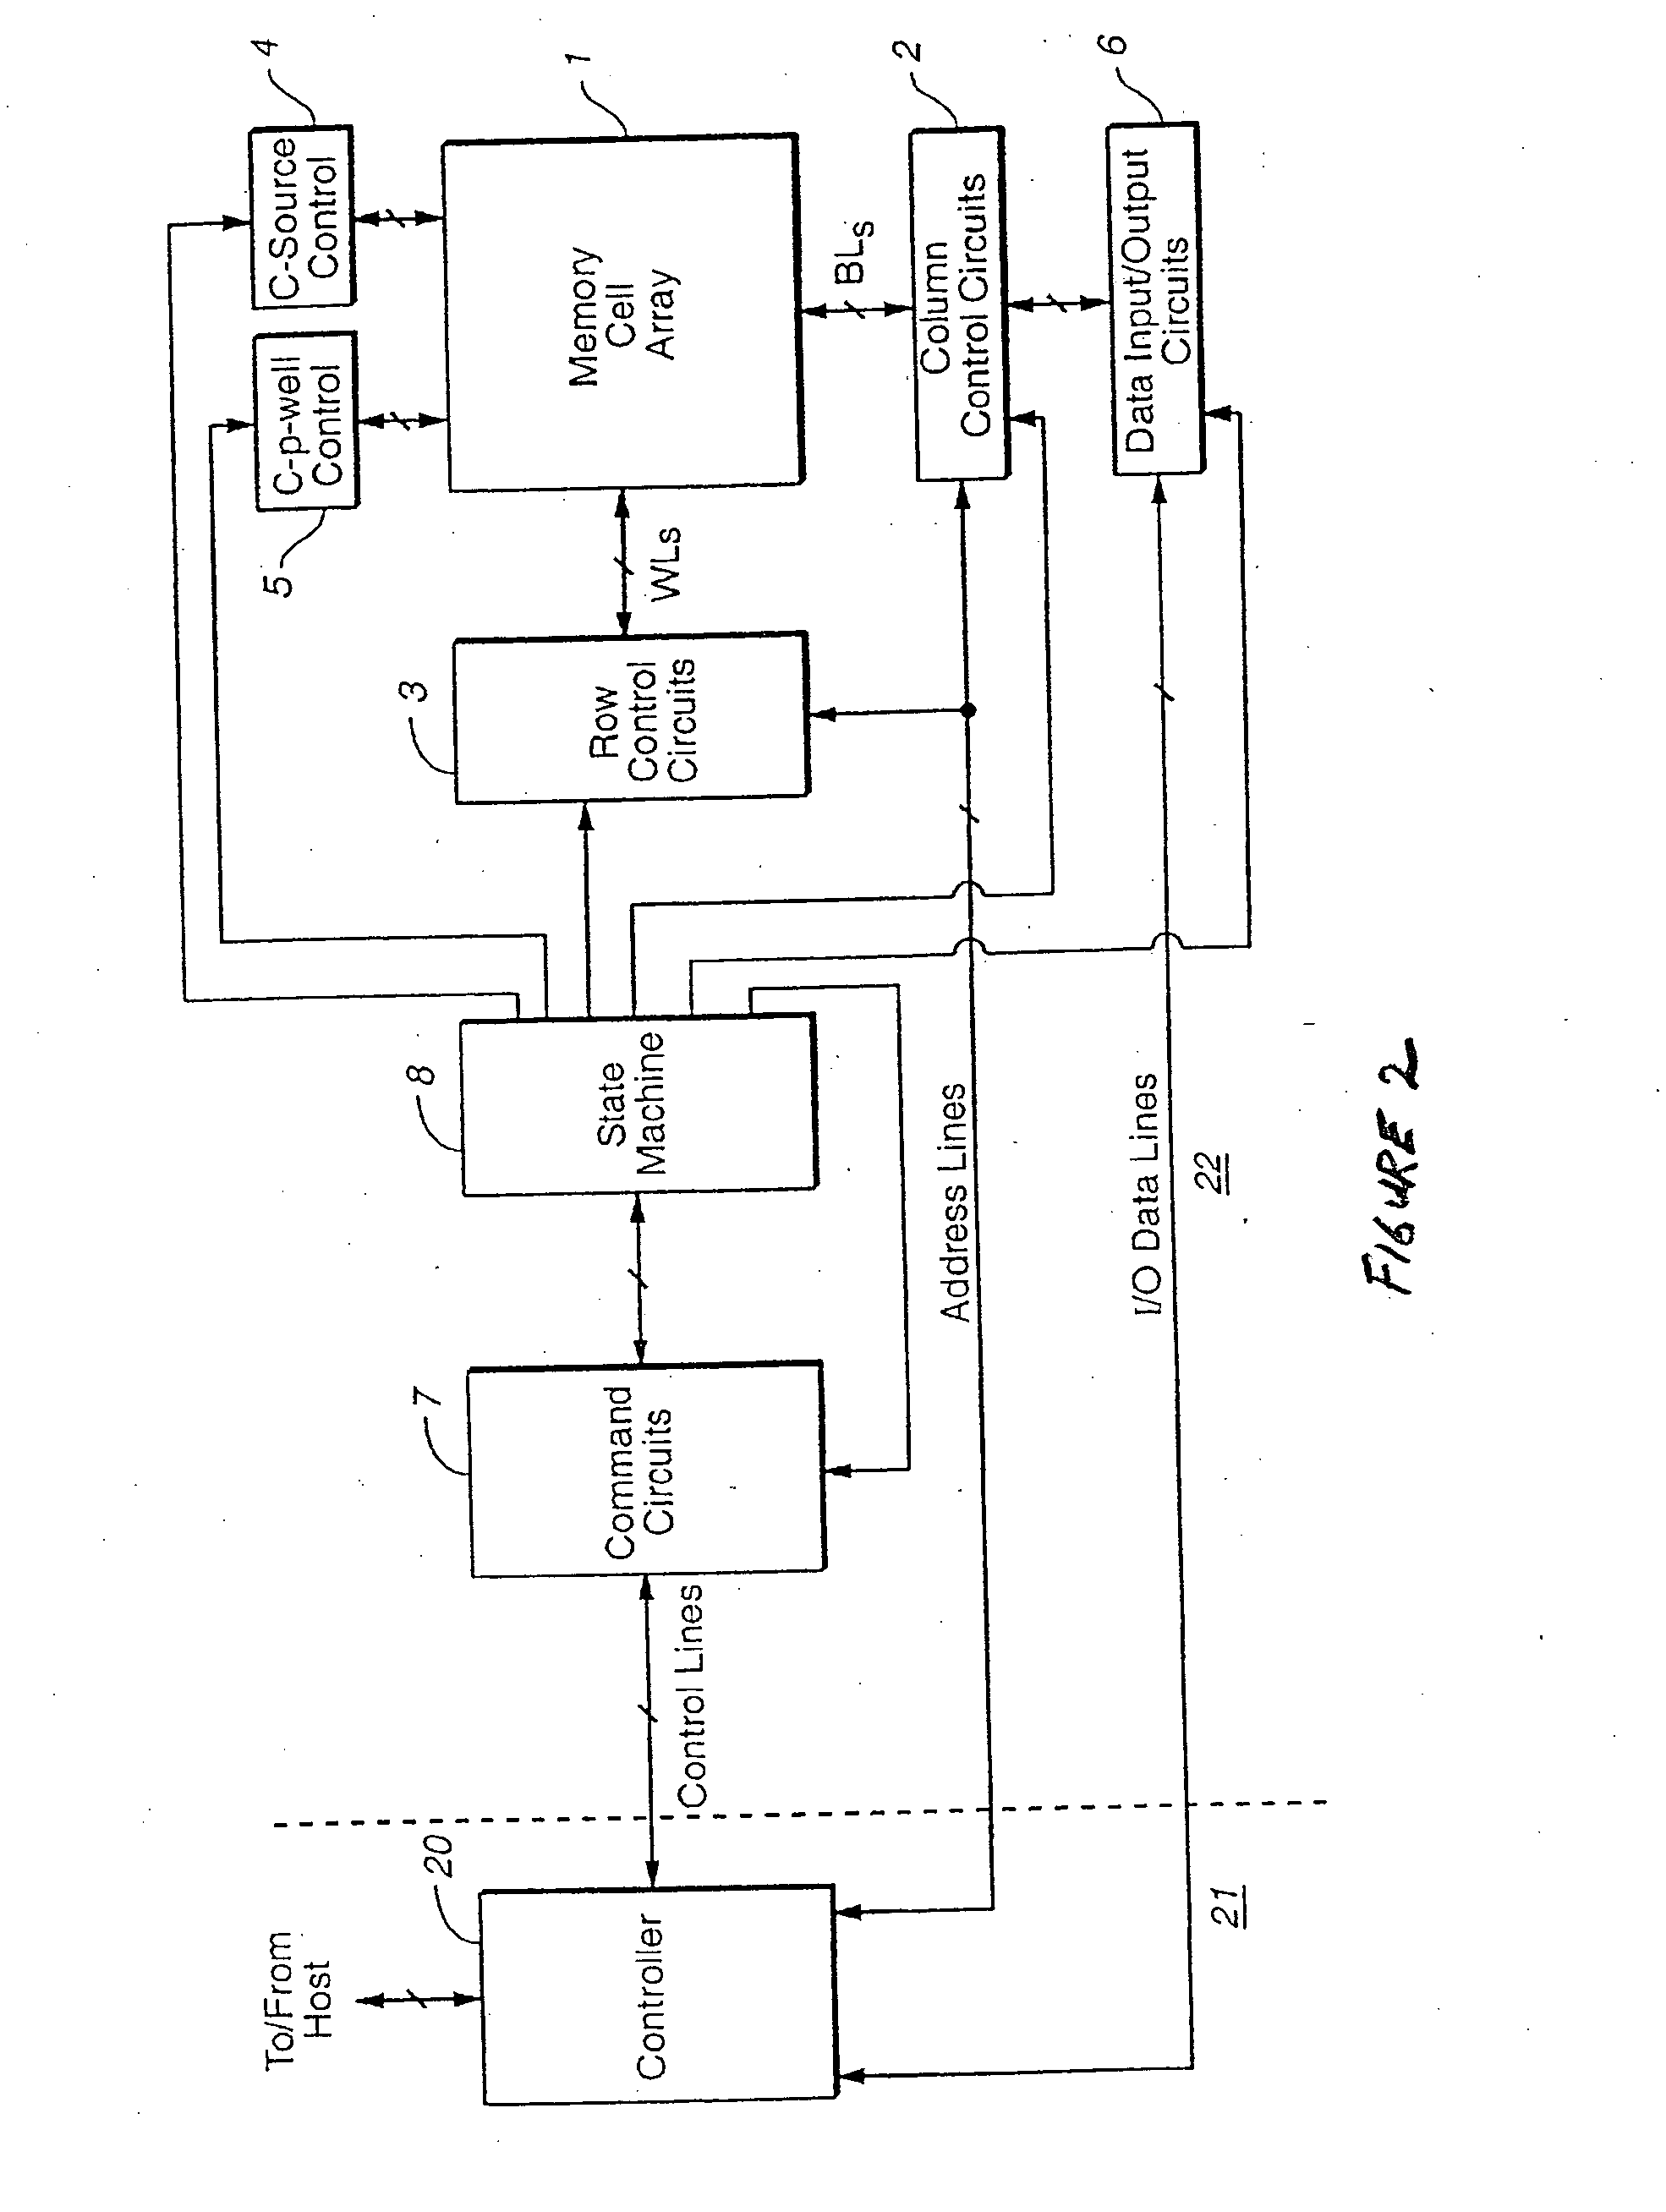 Methods for identifying non-volatile memory elements with poor subthreshold slope or weak transconductance